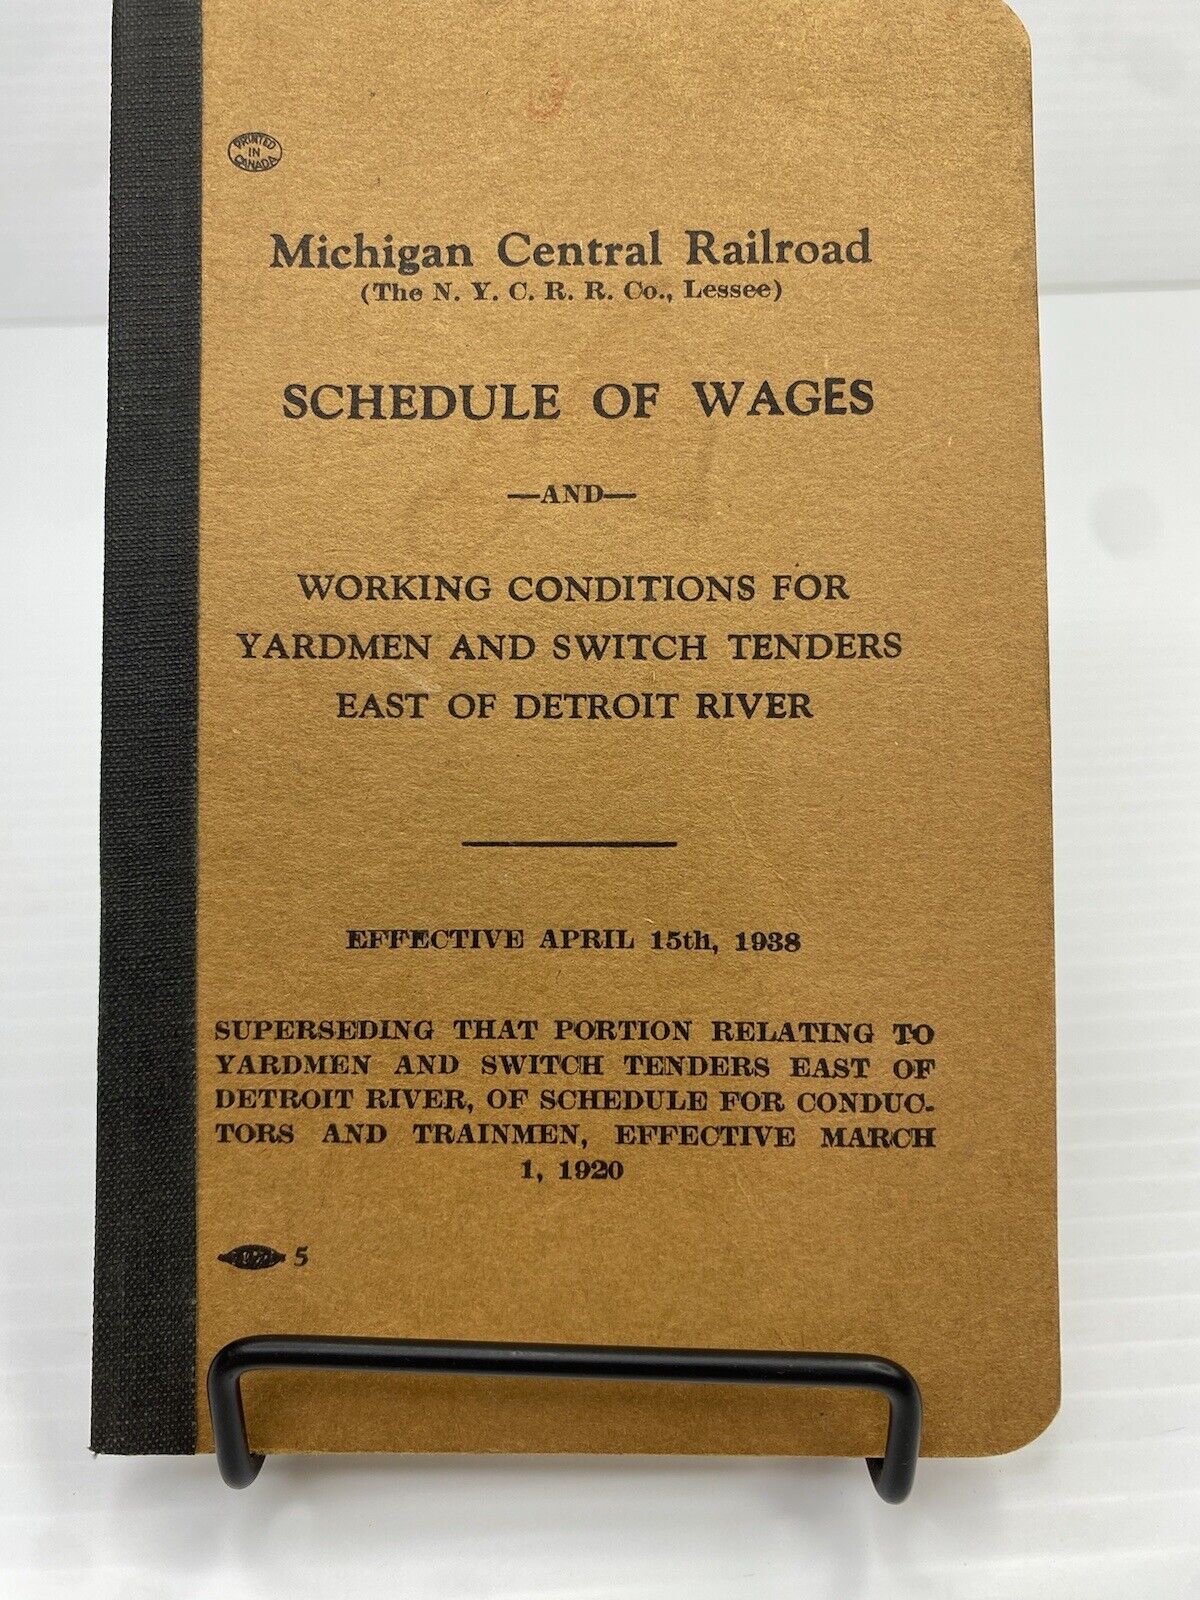 1938 Michigan Central Railroad Schedule of Wages NYCRR Co East of Detroit River